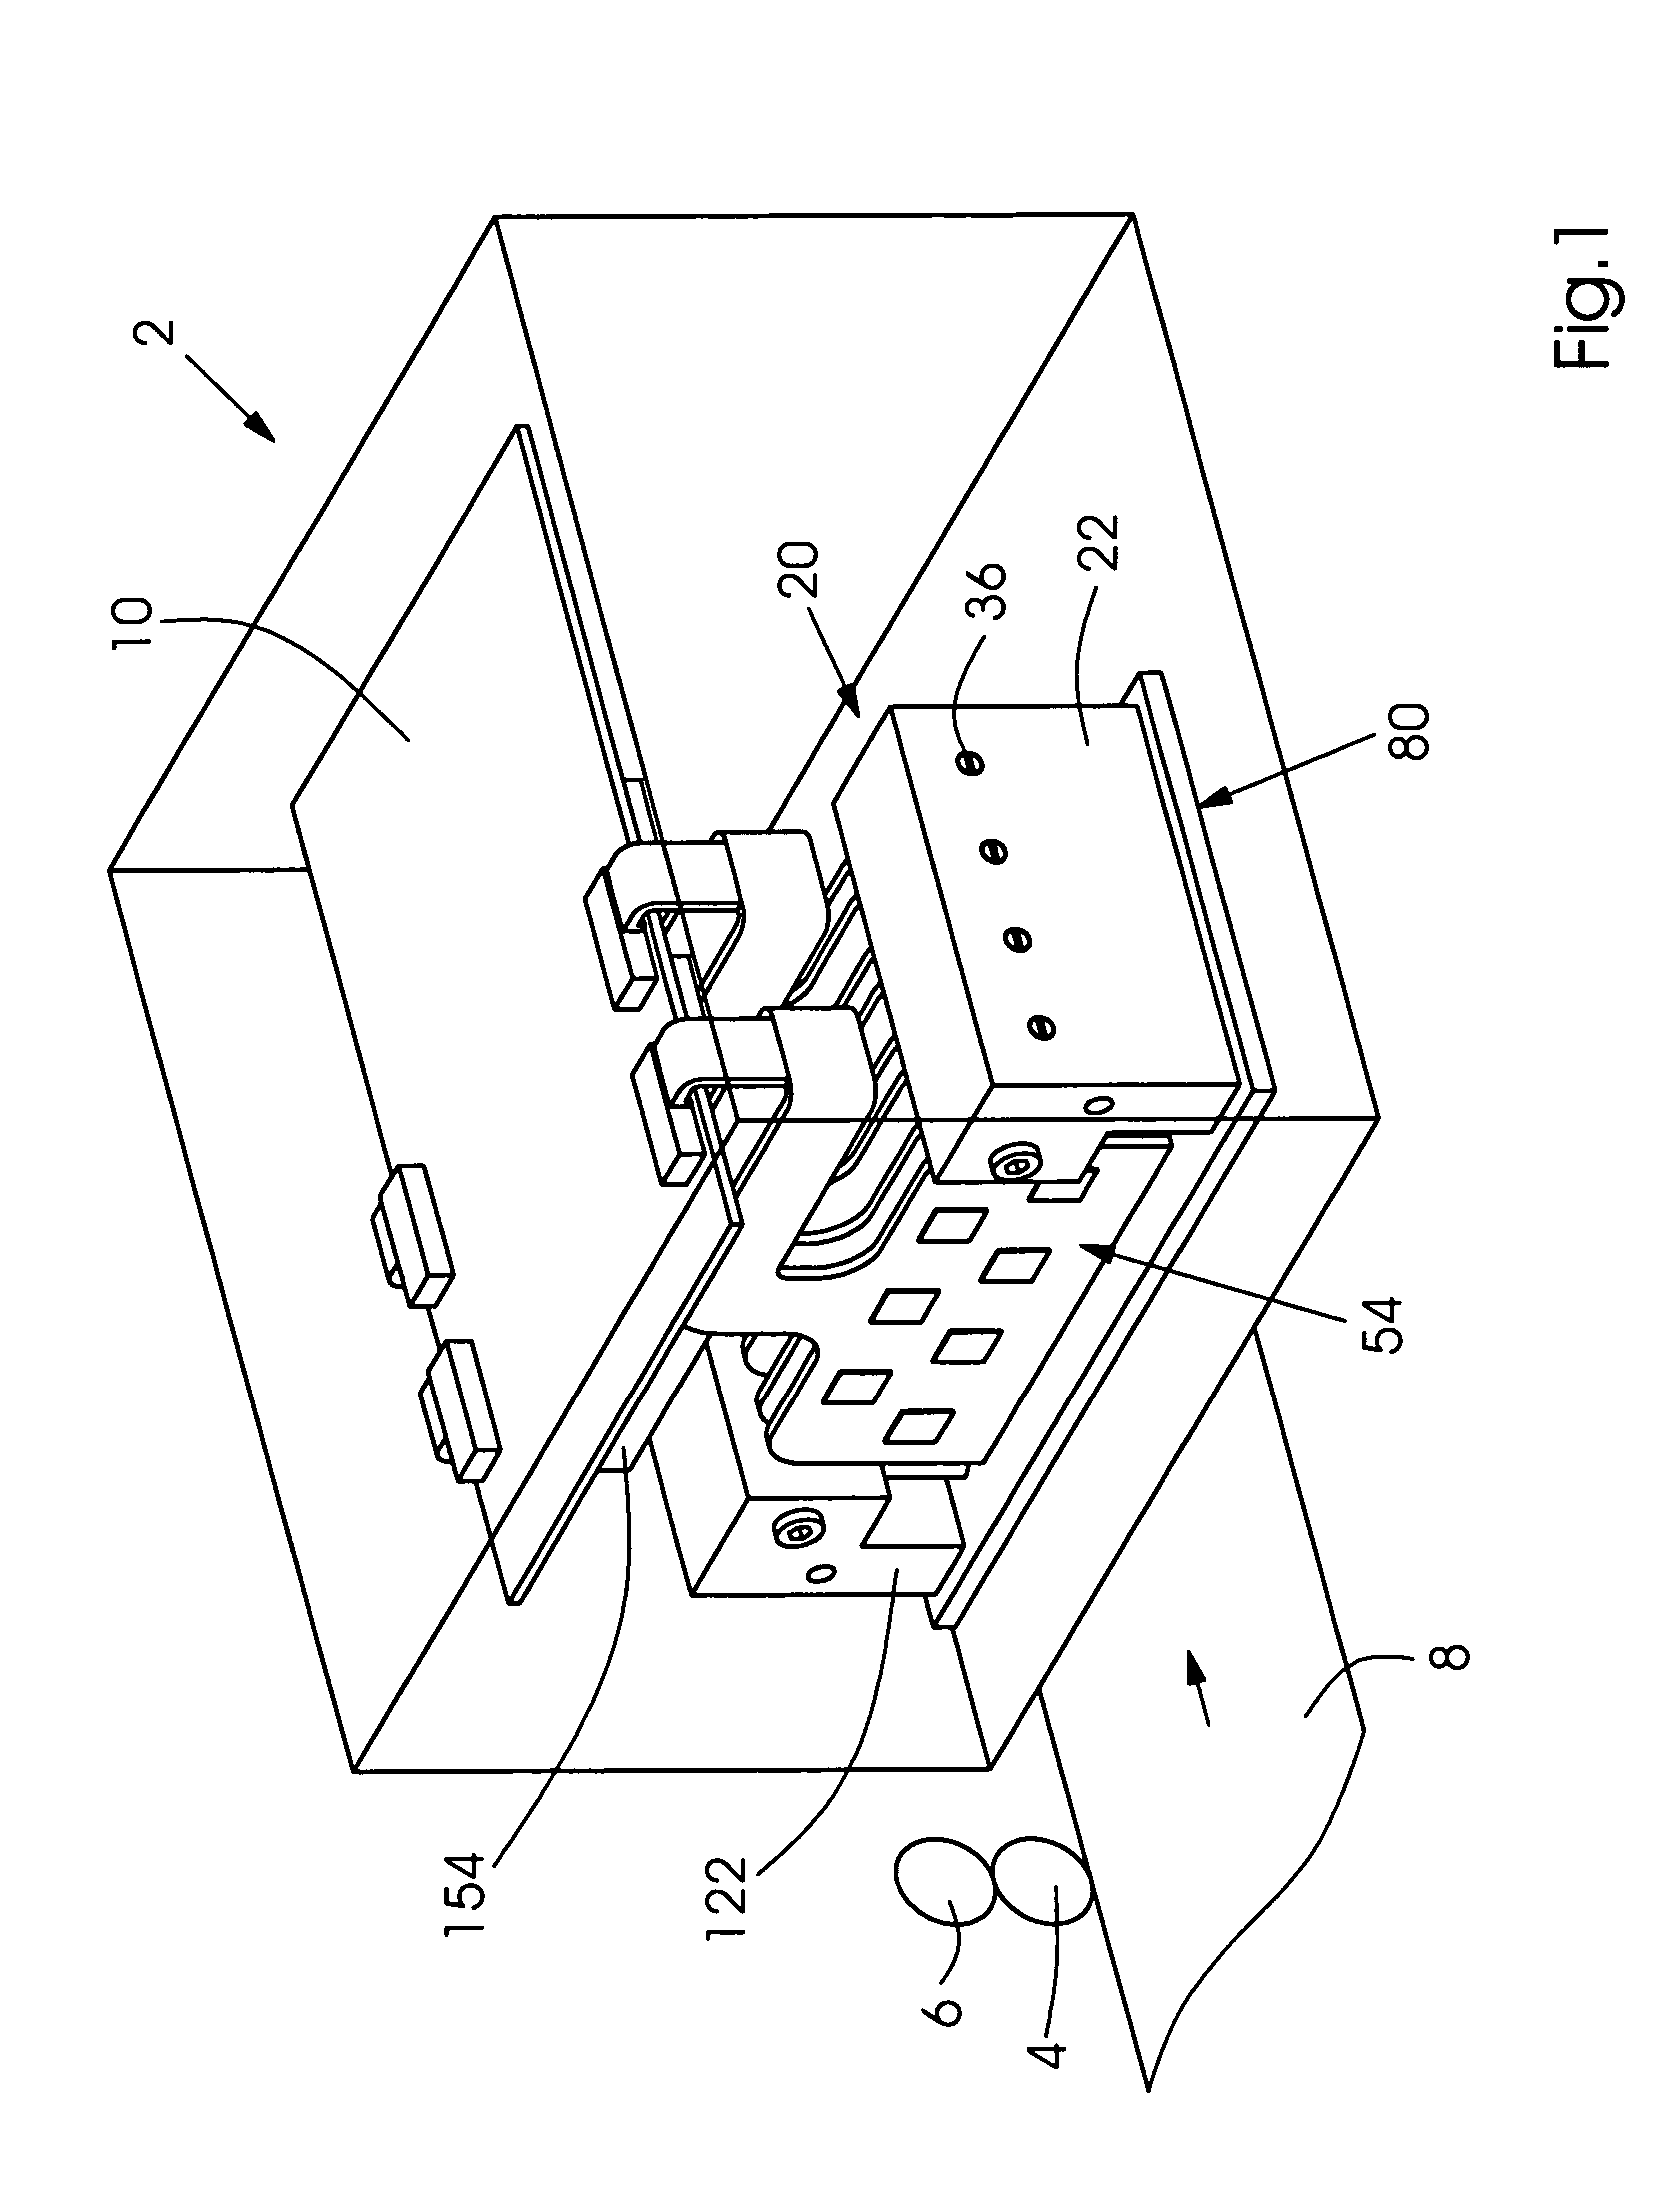 Ink jet device with individual shut-off